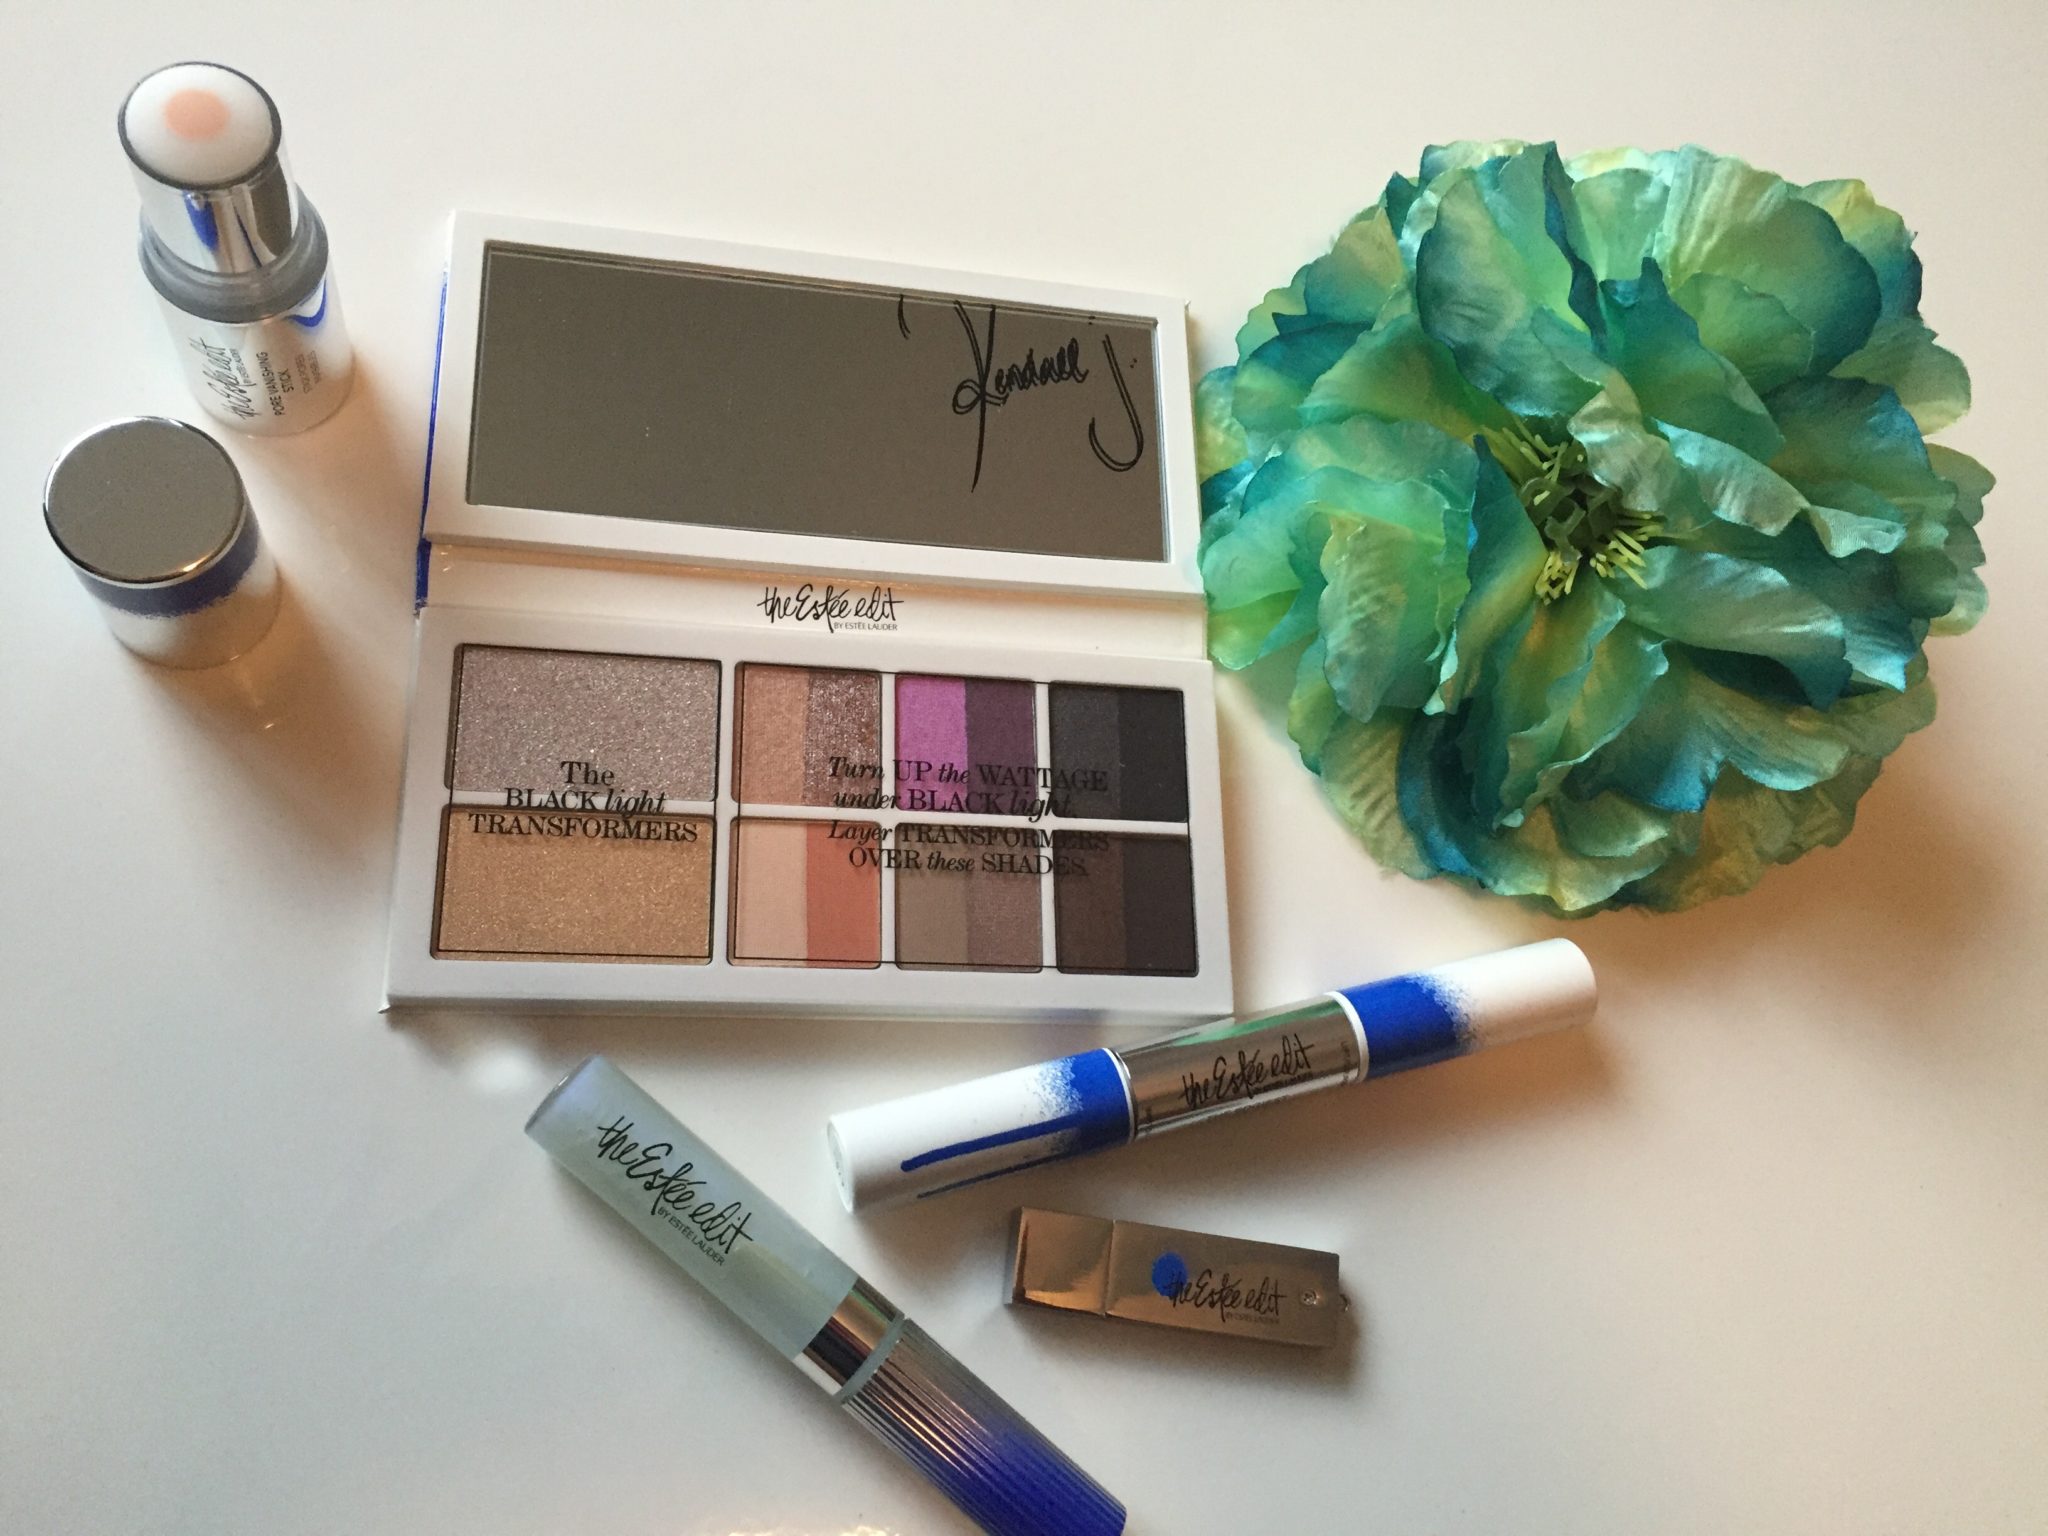 Pinky Review: The Estee Edit by Estee Lauder